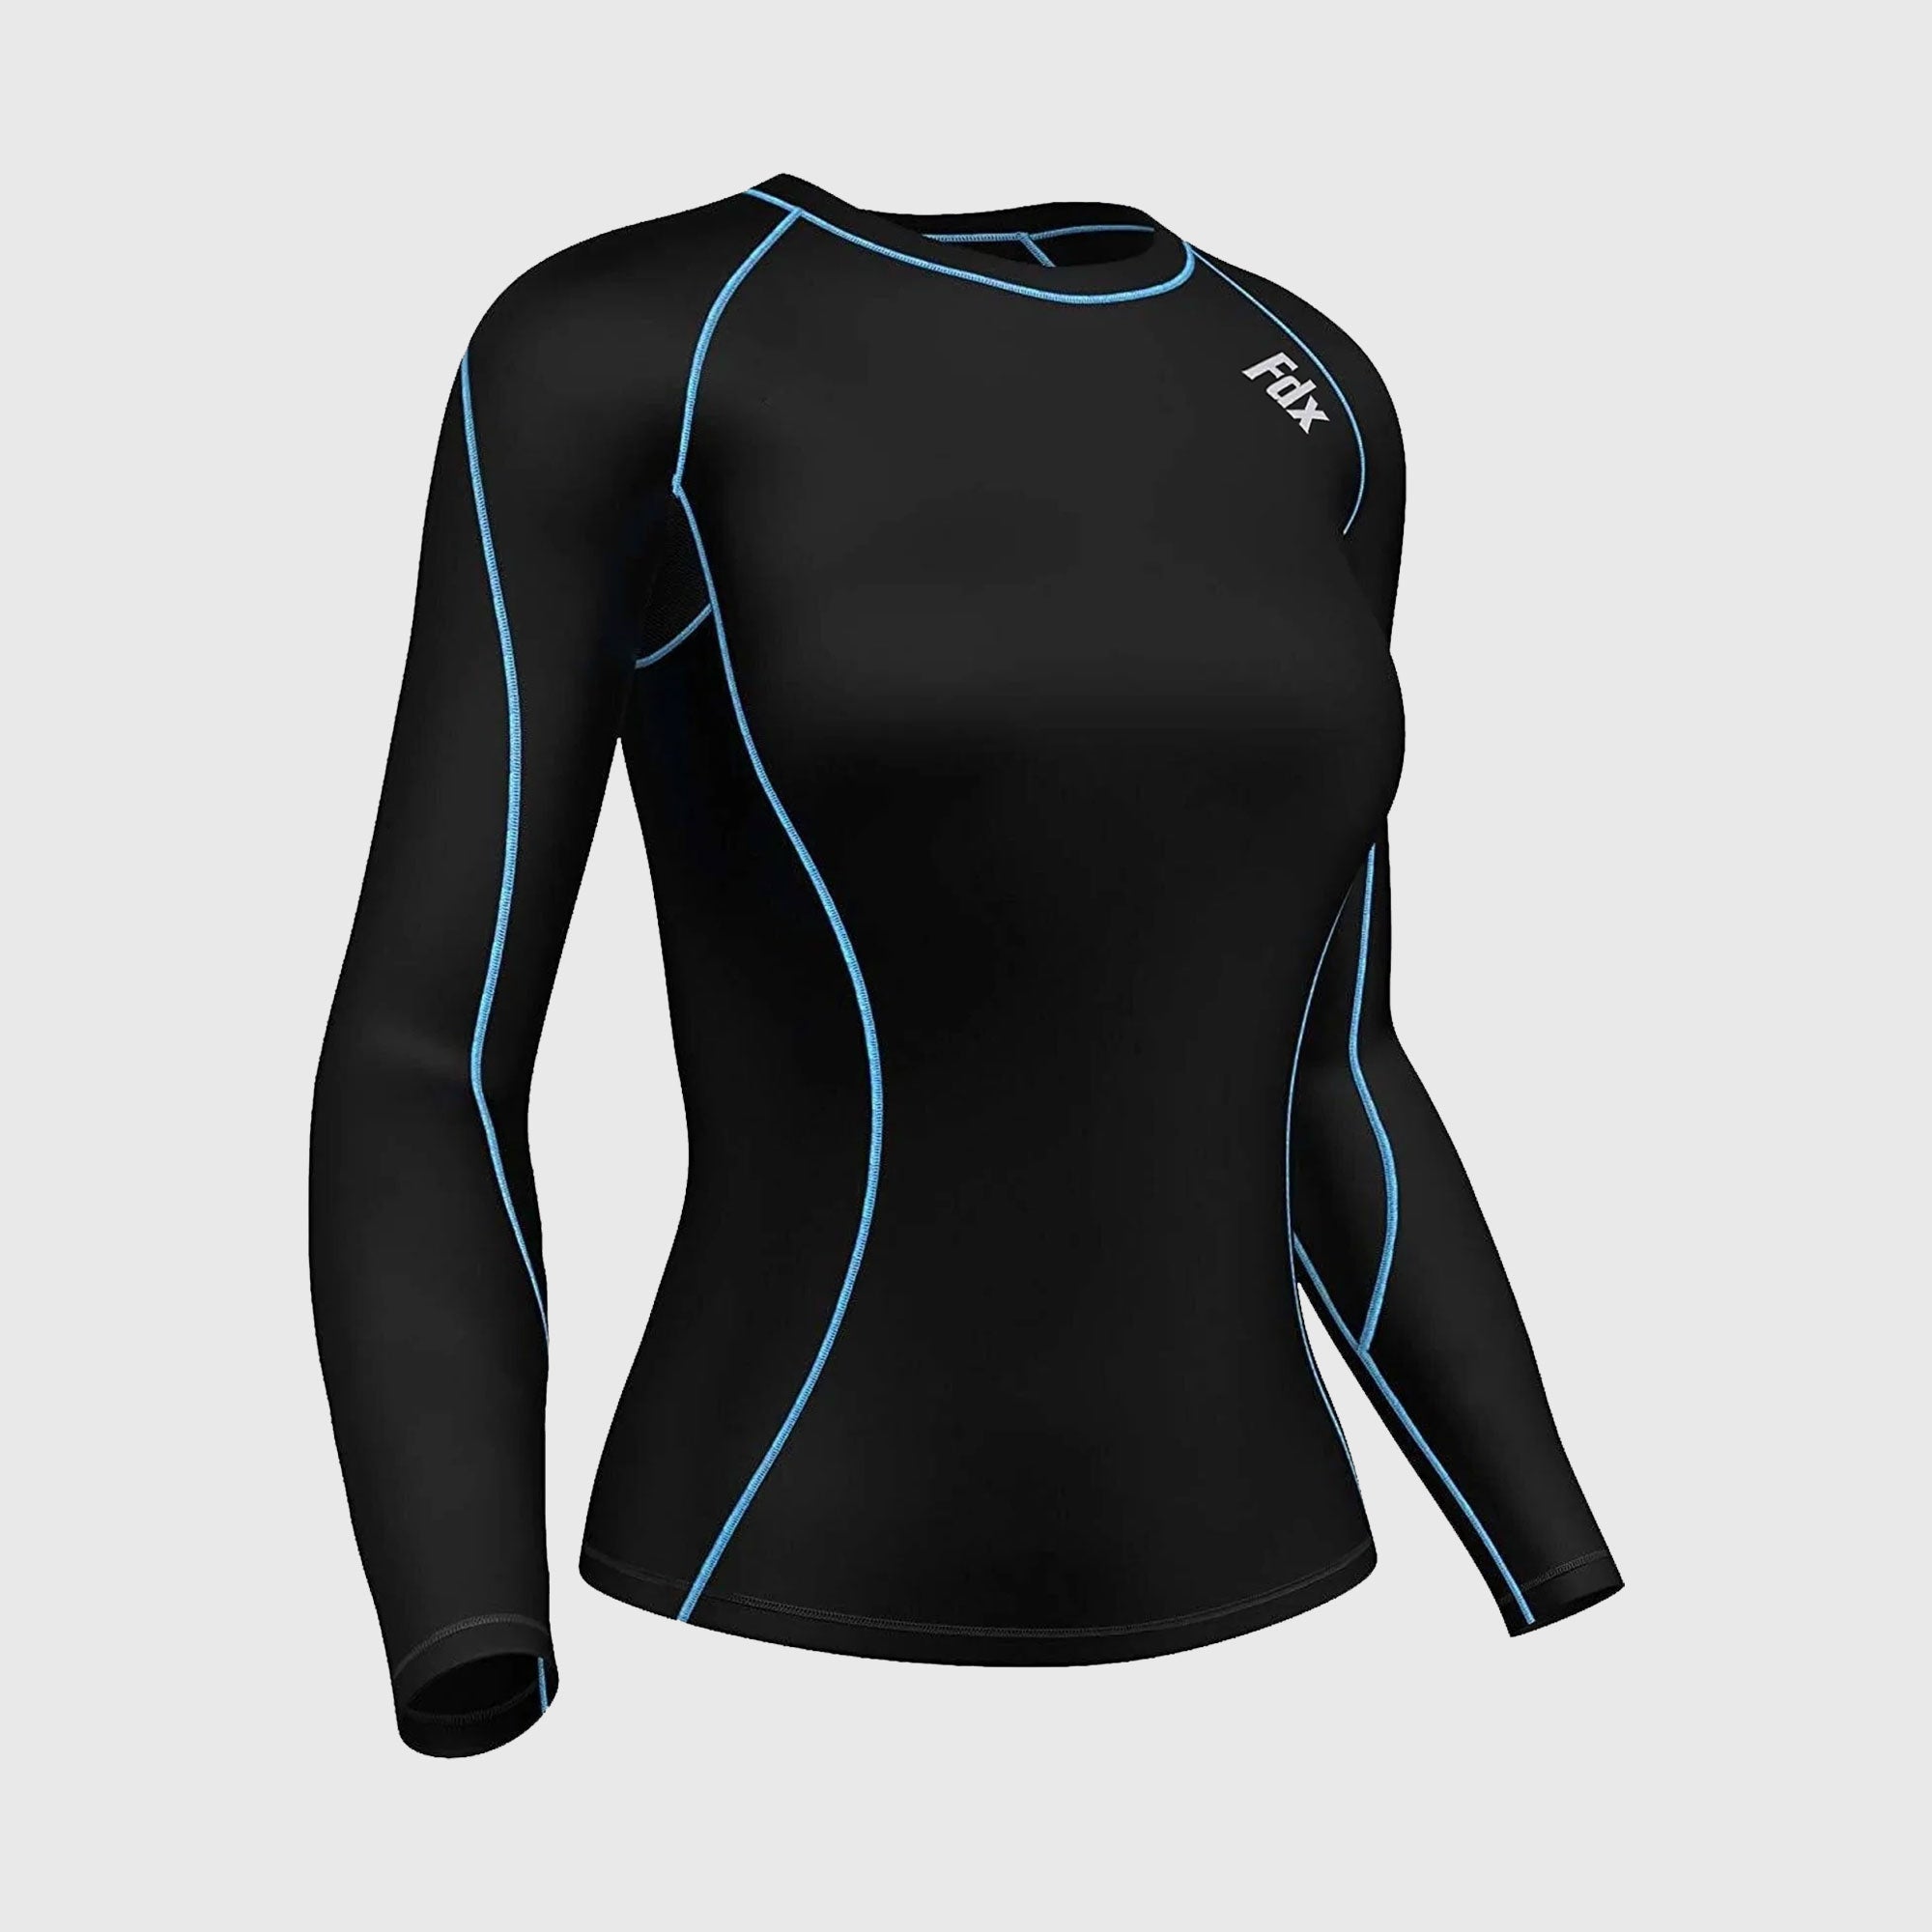 Fdx Women's Long Sleeve Color Ultralight Compression Top Running Gym Workout Wear Rash Guard Stretchable Quick Dry Breathable All Sports outdoor- Monarch